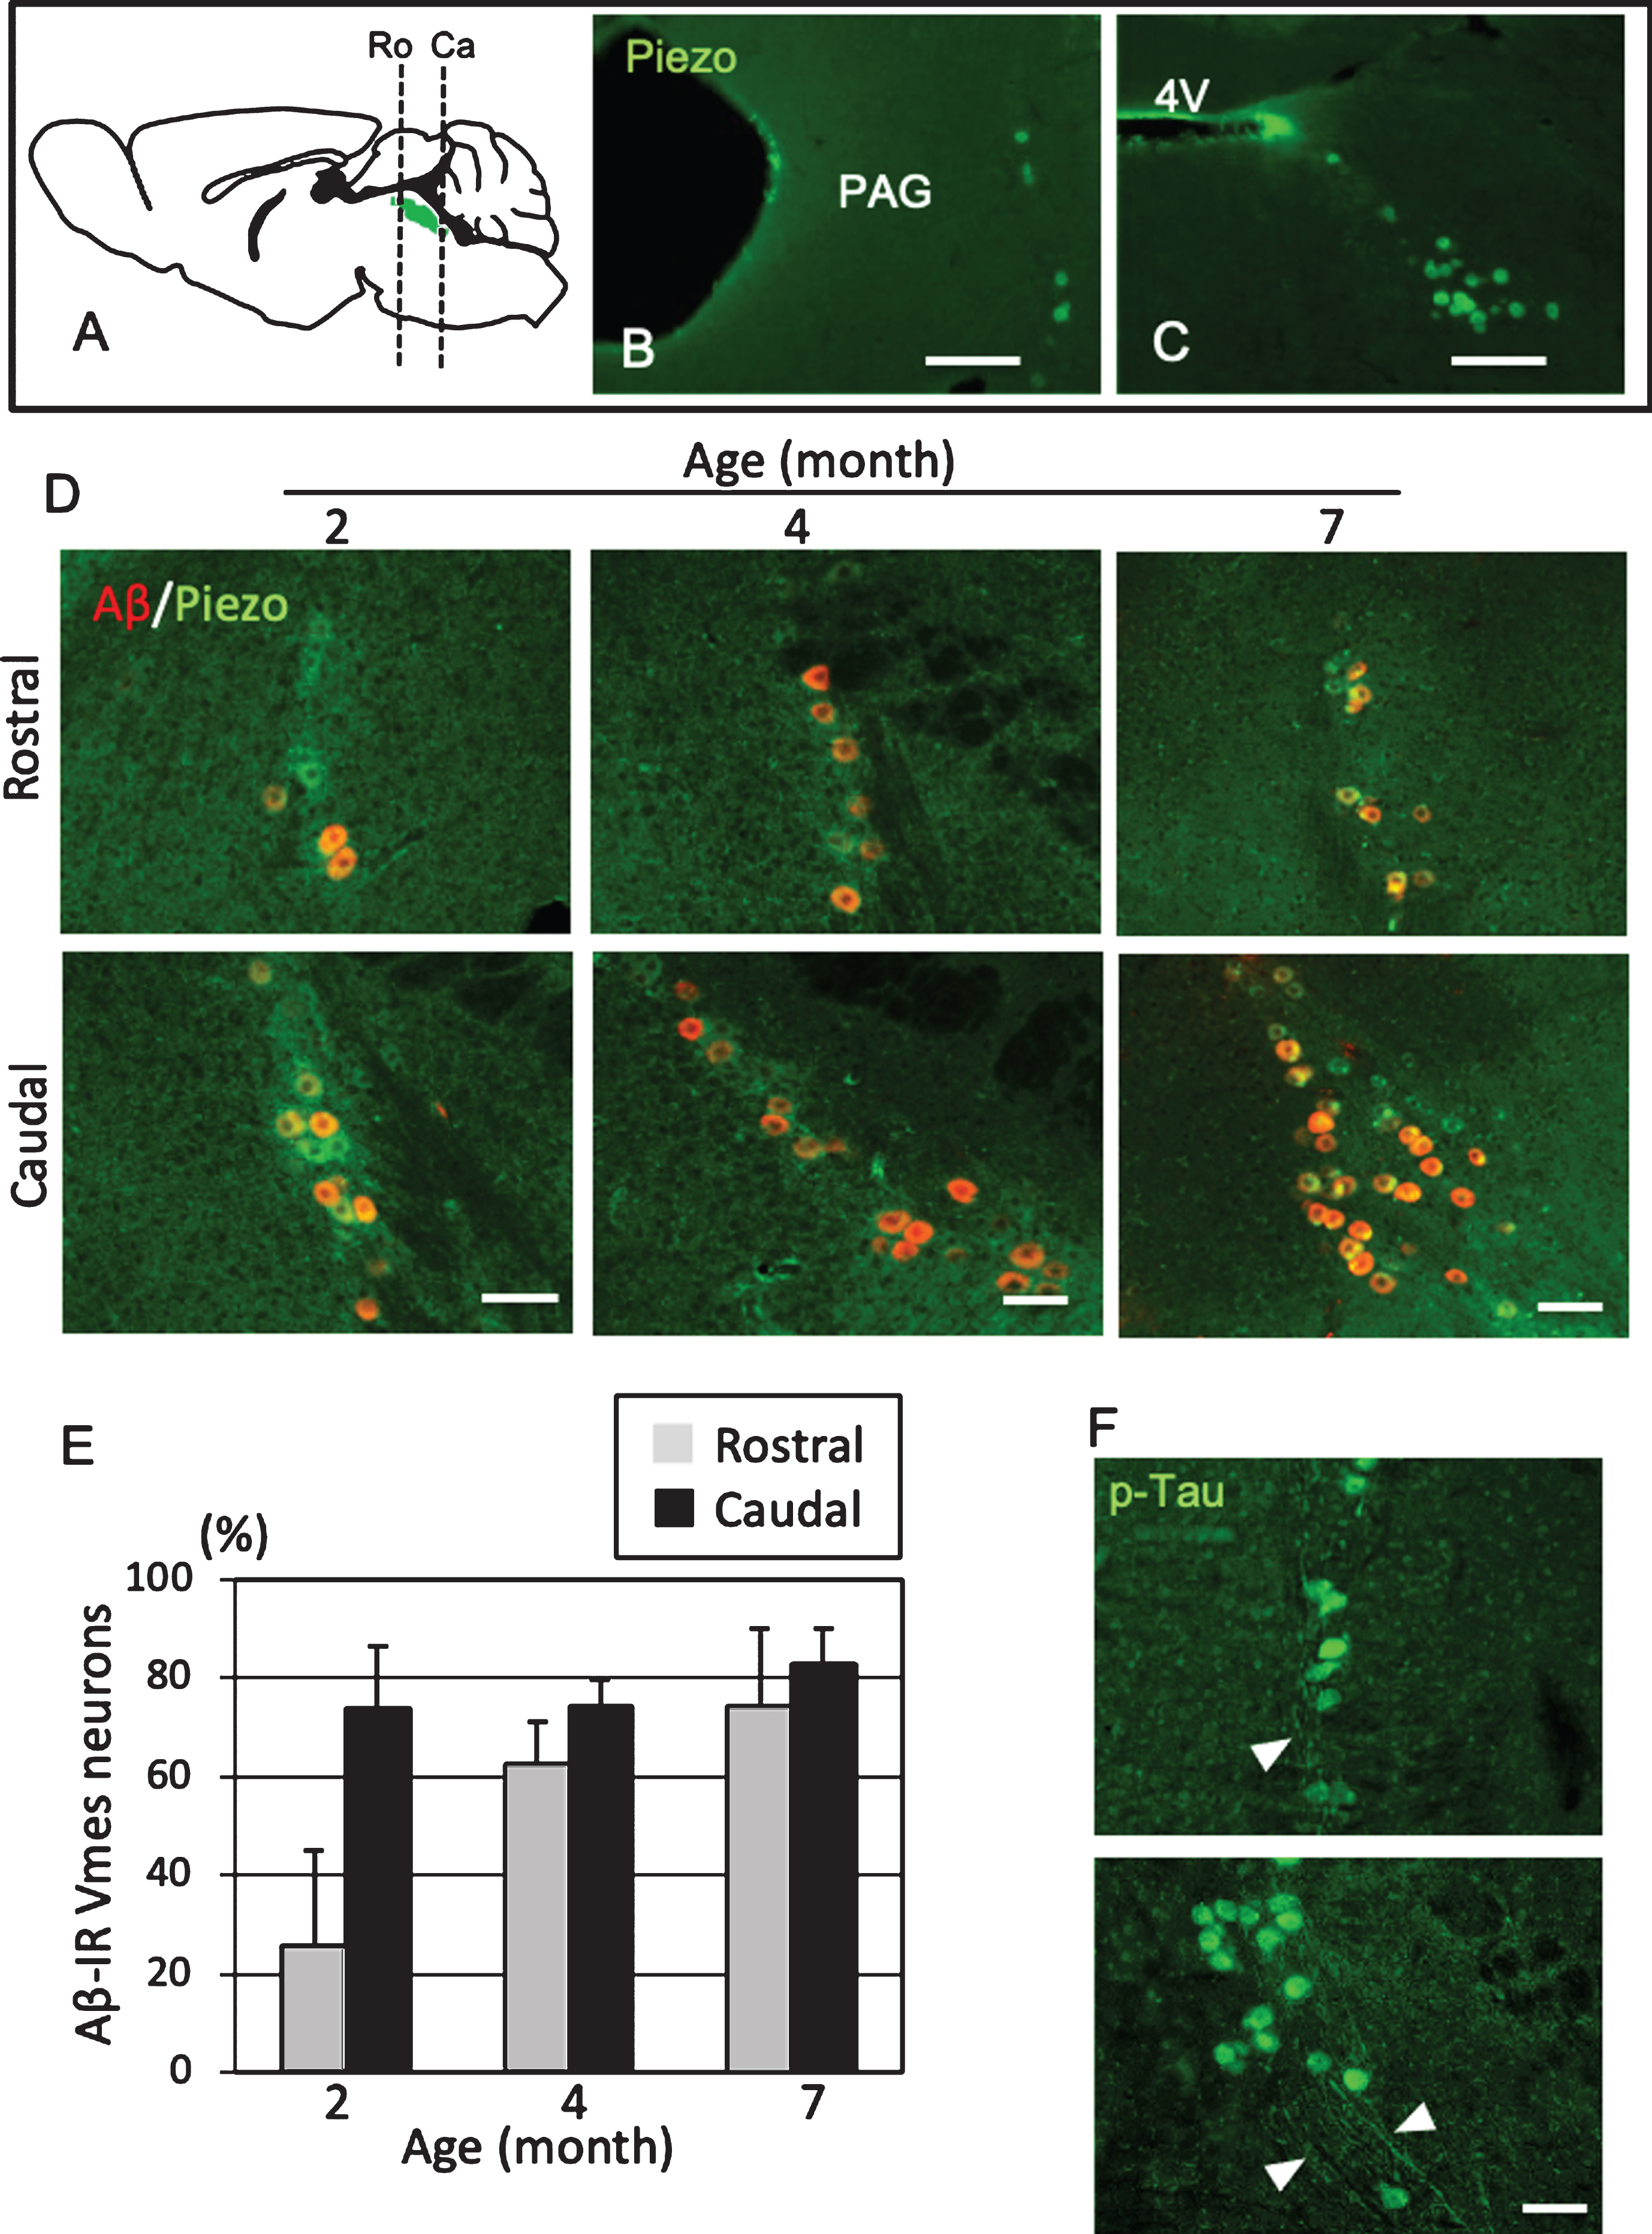 Position- and age-dependent amyloid β (Aβ) deposition in Vmes neurons in 3×Tg-AD mice. A) The positions of the histological sections from the rostral (Ro) and caudal (Ca) sides of the Vmes (Green). B, C) Immunofluorescence images of Piezo2 inVmes neurons in the rostral (B) and caudal (C) regions. PAG, periaqueductal gray; 4V, 4th ventricle. D) Immunofluorescence images of Aβ and Pezo2 in the rostral (Ro) and caudal (Ca) parts of the Vmesin 2-, 4-, and 7-month-old 3×Tg-AD mice. E) Age-dependent ratios of Aβ-IR Vmes neurons in the rostral and caudal regions of the Vmes. The data are the means±SDs, n = 10. F) p-Tau-IR neurons in 7-month-old 3×Tg-AD mice. The rostral (upper) and caudal (lower) parts of Vmes. The arrowheads indicate p-Tau-IR axons of Vmes neurons. Scale bars: B, C, 200μm; D, F, 50μm.